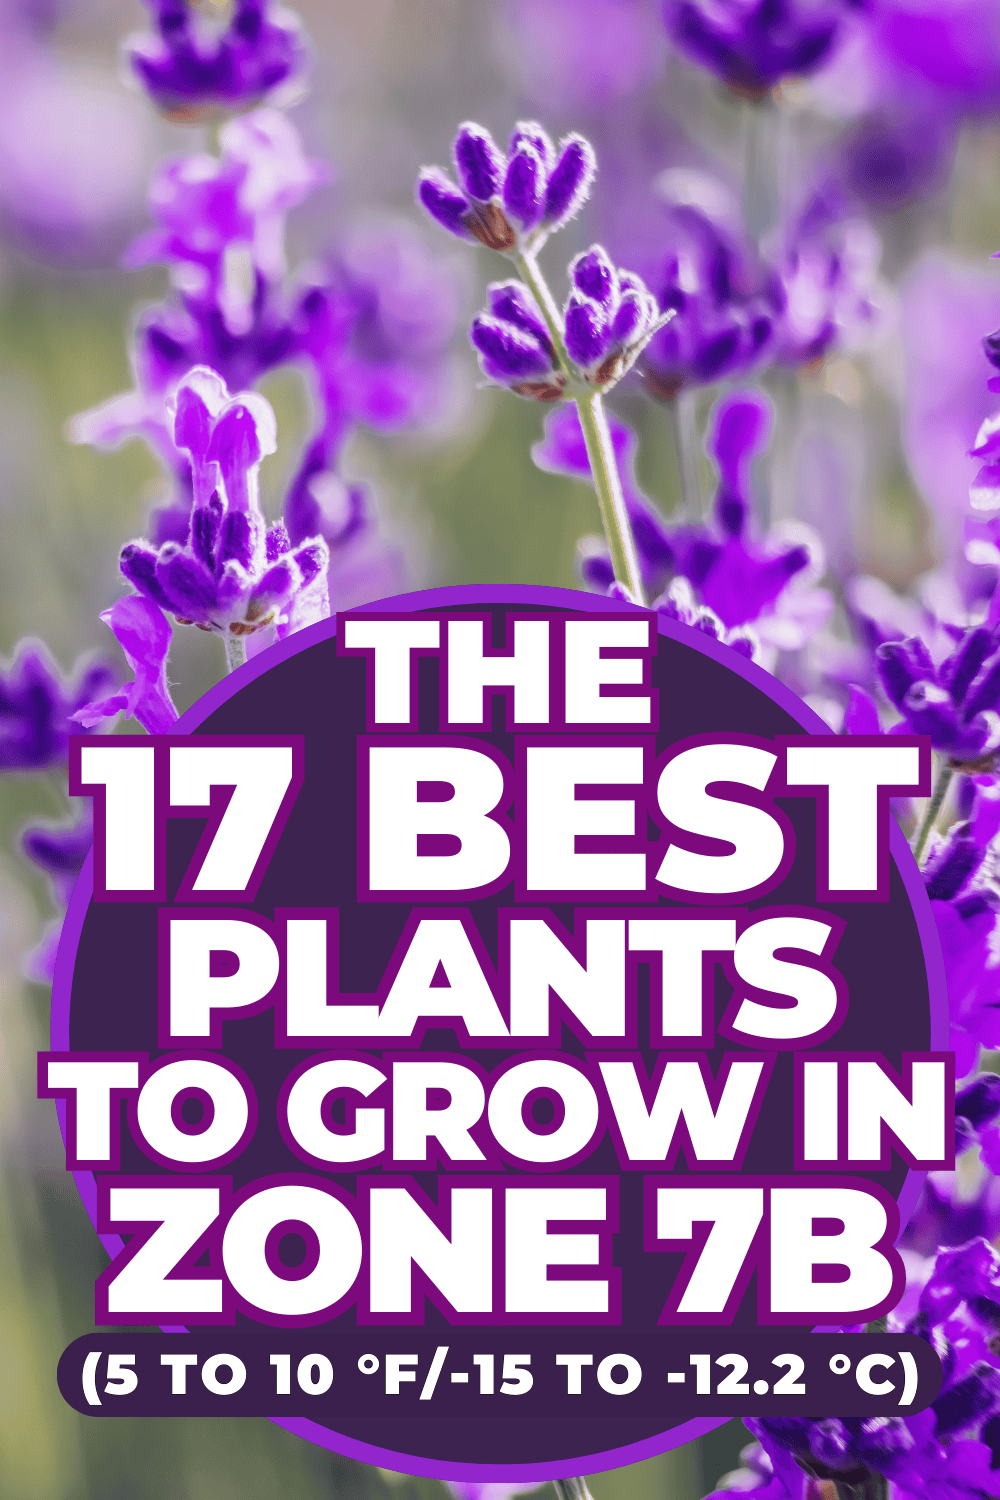 The 17 Best Plants to Grow in Zone 7b (5 to 10 °F/-15 to -12.2 °C)